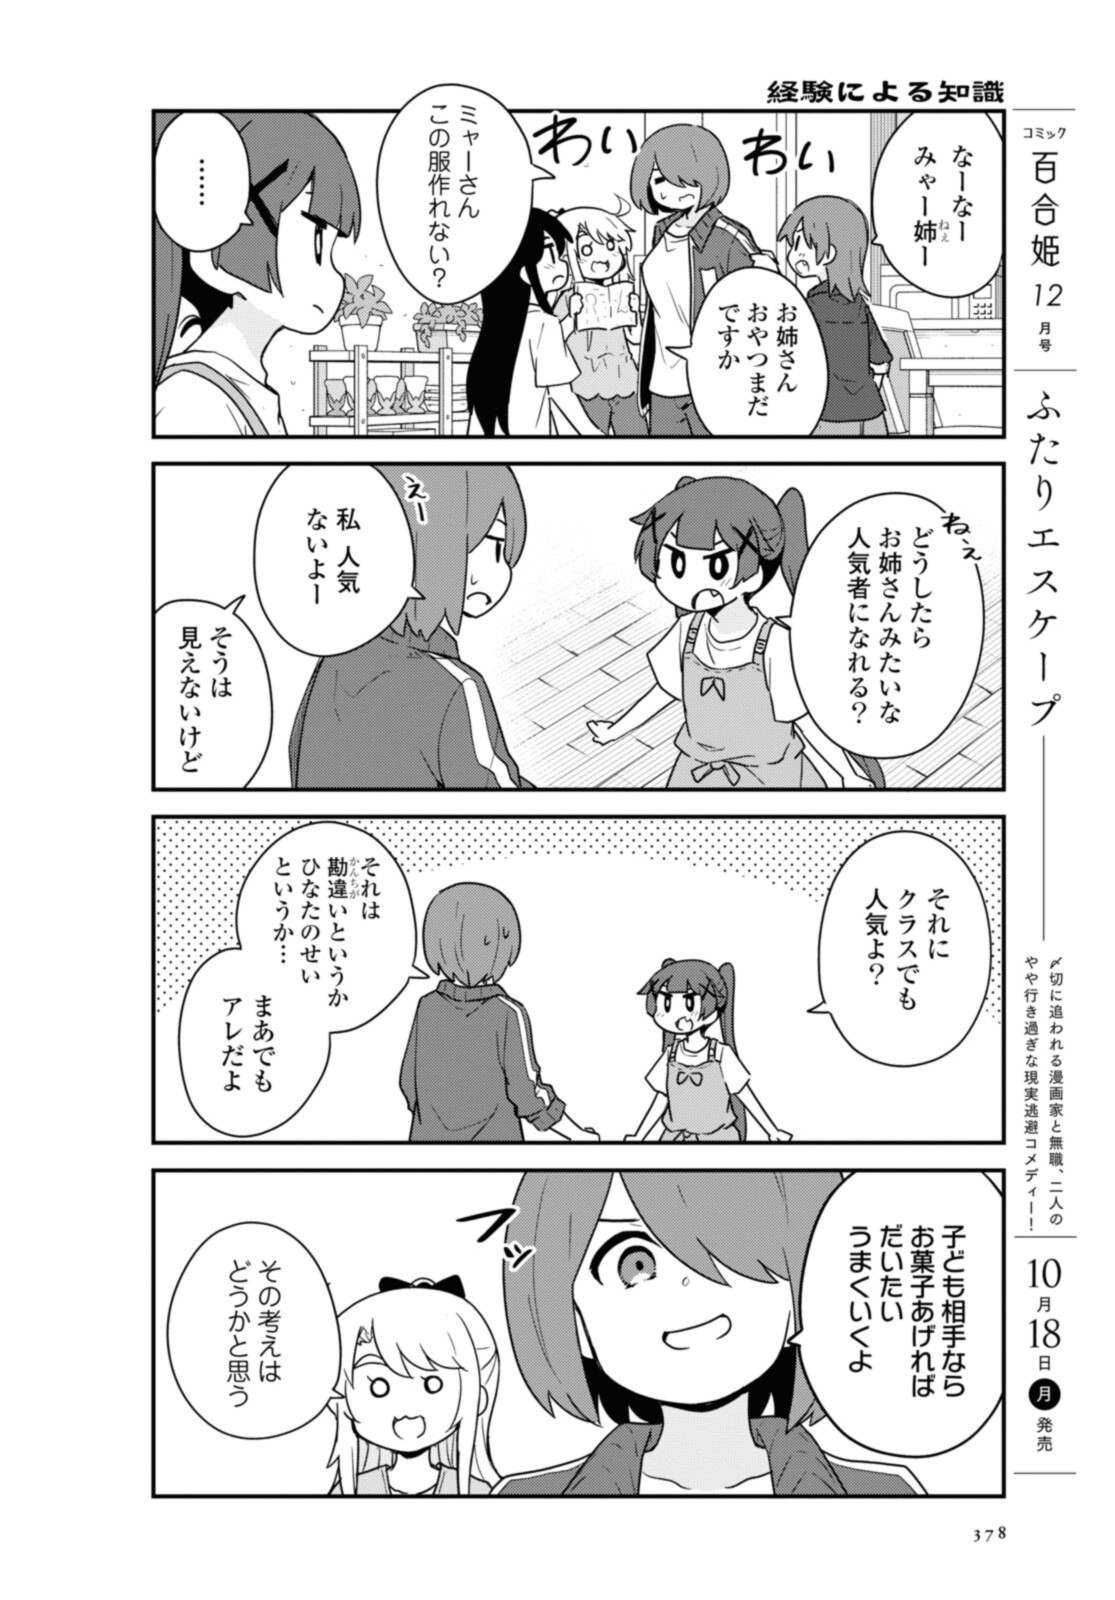 Wataten! An Angel Flew Down to Me 私に天使が舞い降りた！ 第87.1話 - Page 2